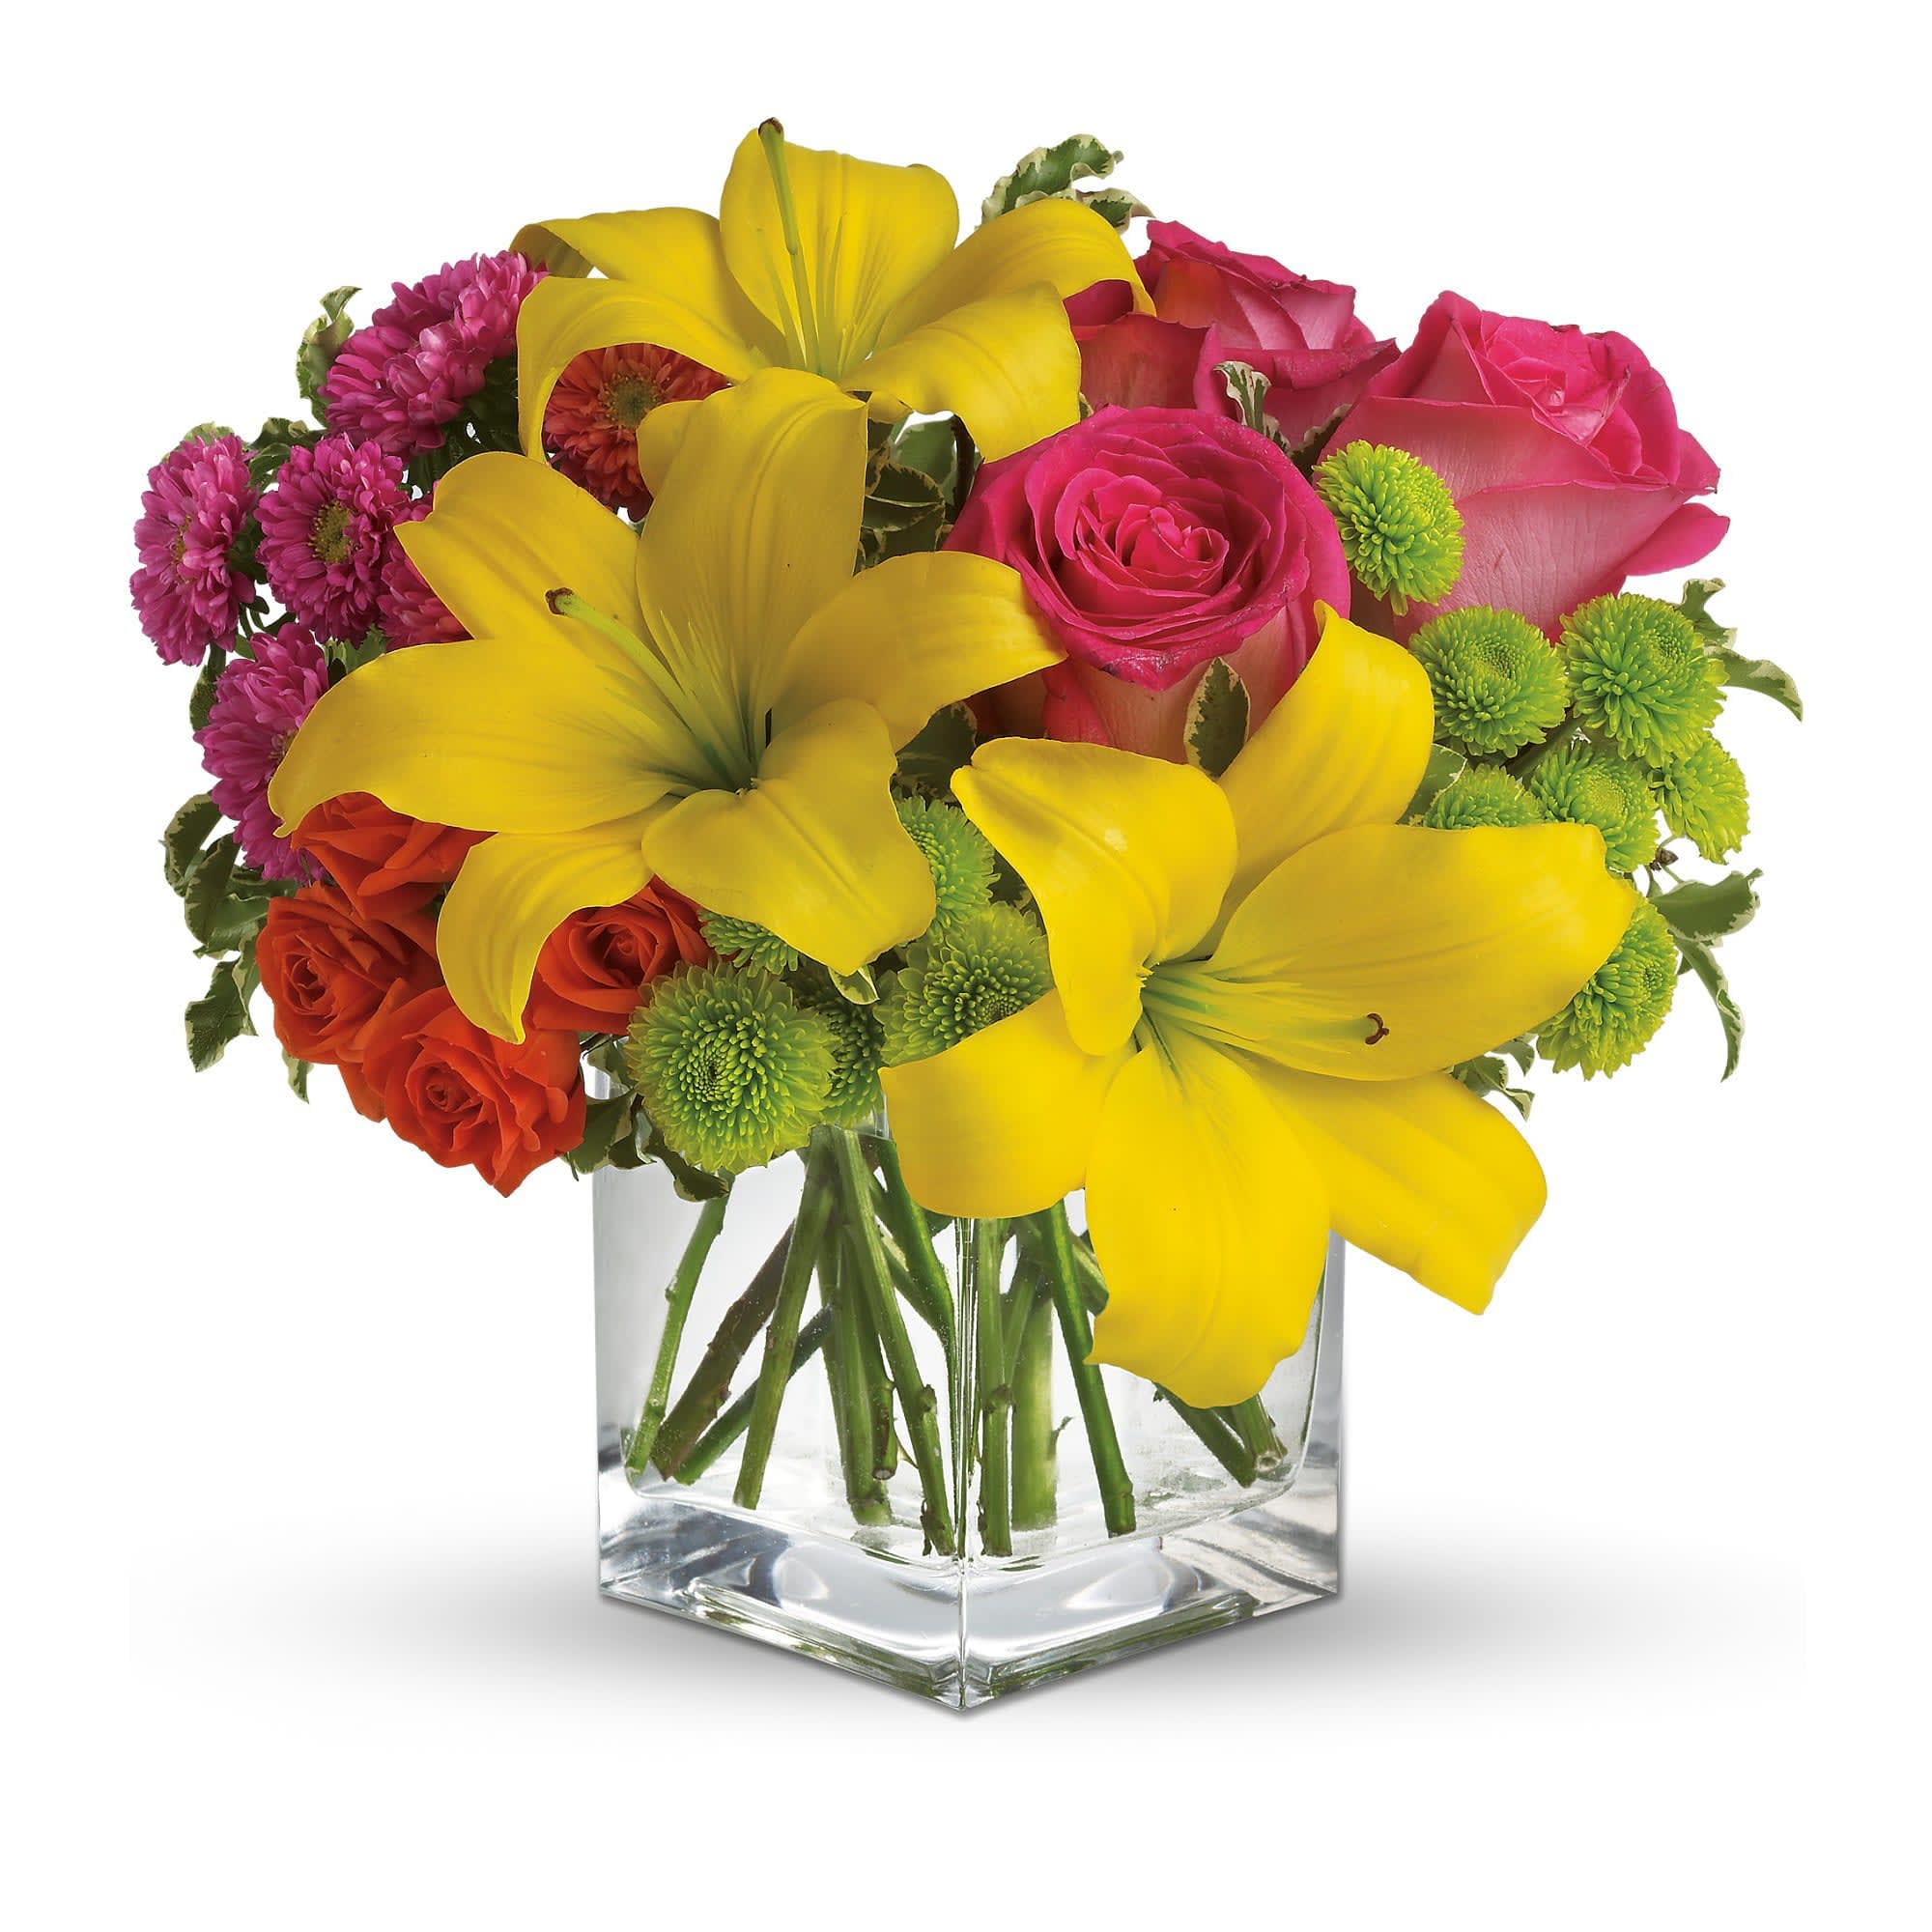 Teleflora's Sunsplash - Send this summery bouquet and you'll make a splendid splash! Perfect for birthdays, thank yous, barbecues and beyond. This warm-weather charmer will be welcome everywhere! 